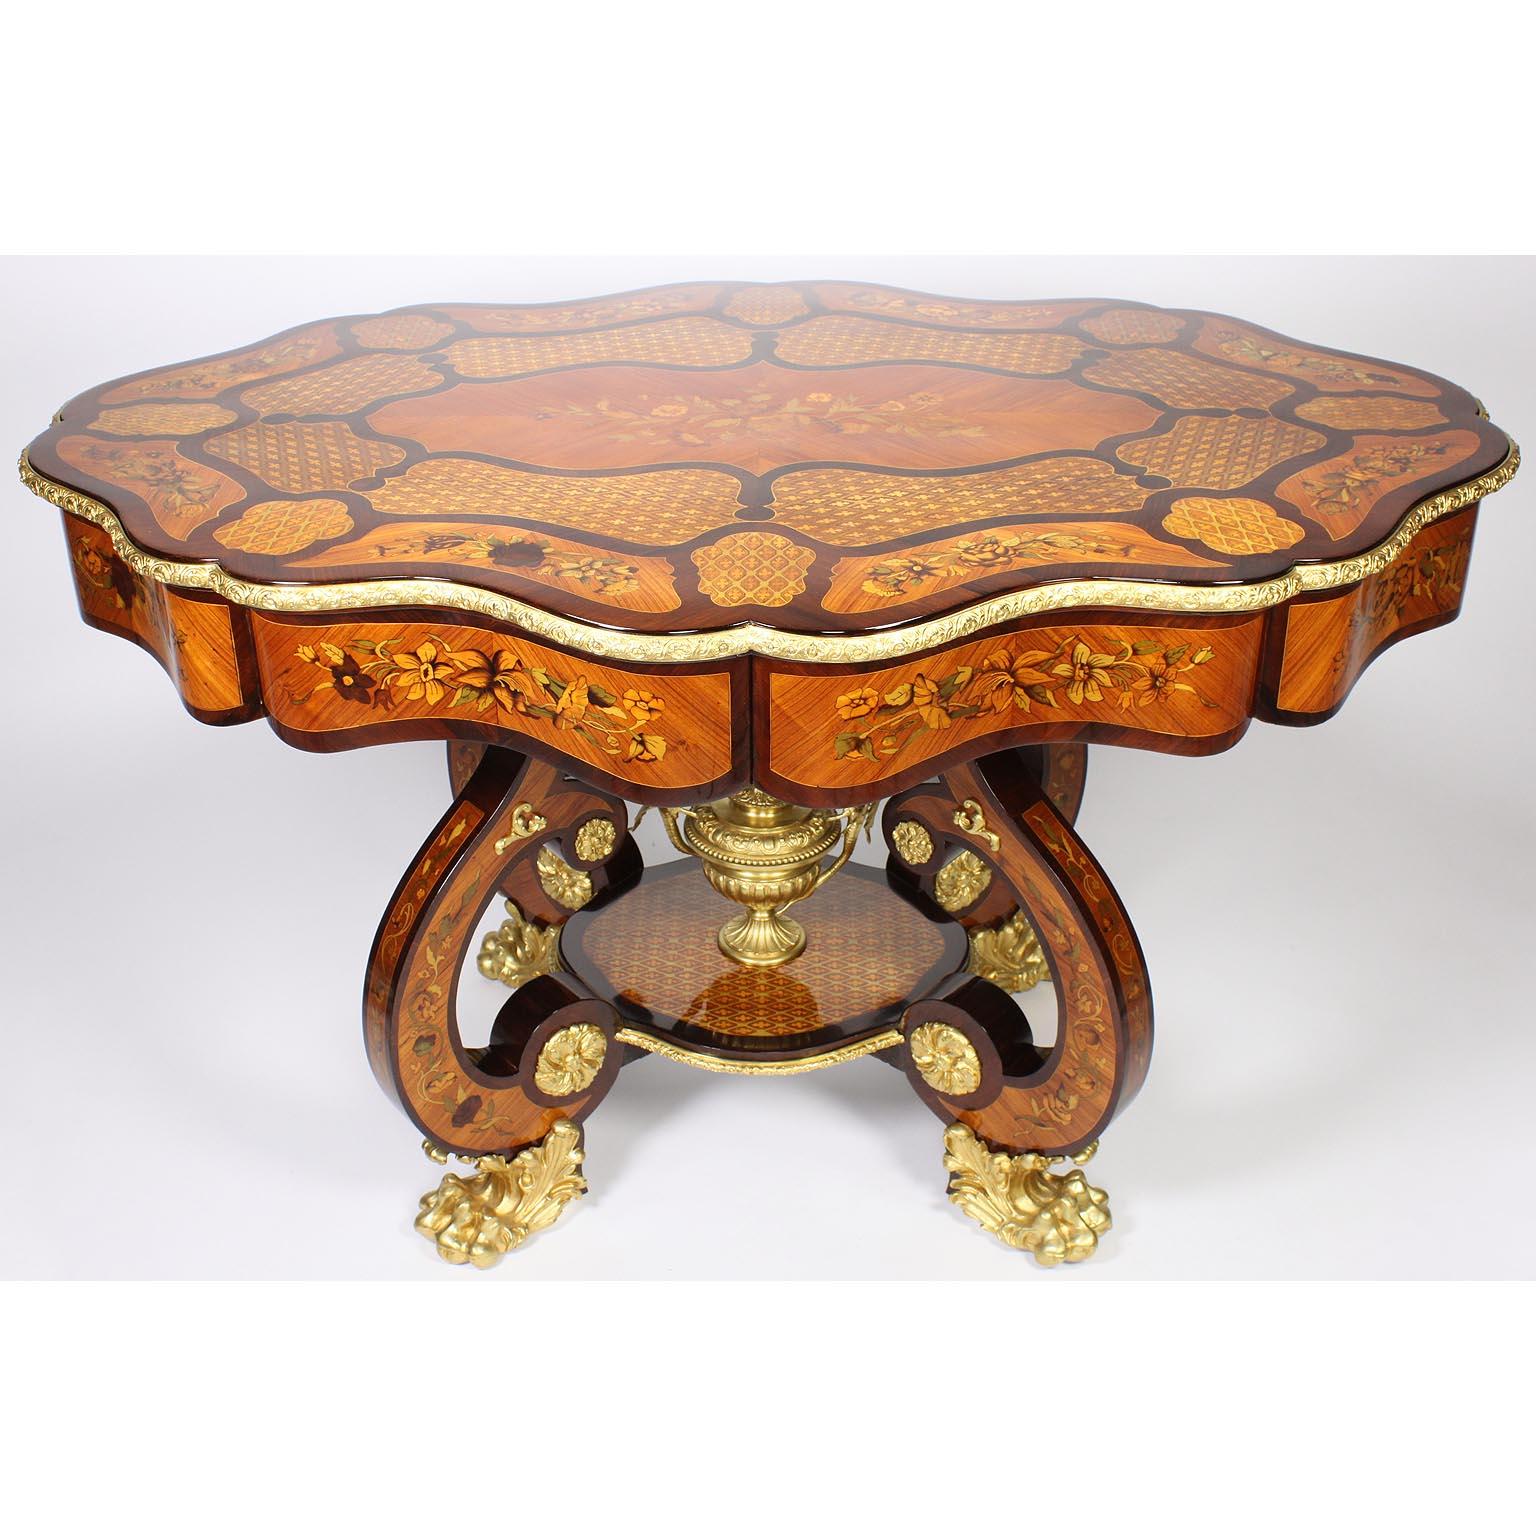 A fine Italian 19th century mahogany, satinwood and tulipwood floral marquetry and gilt-bronze mounted center table or writing desk. The serpentine inlaid shaped top centered with a marquetry floral arrangement medallion, surrounded by sections of